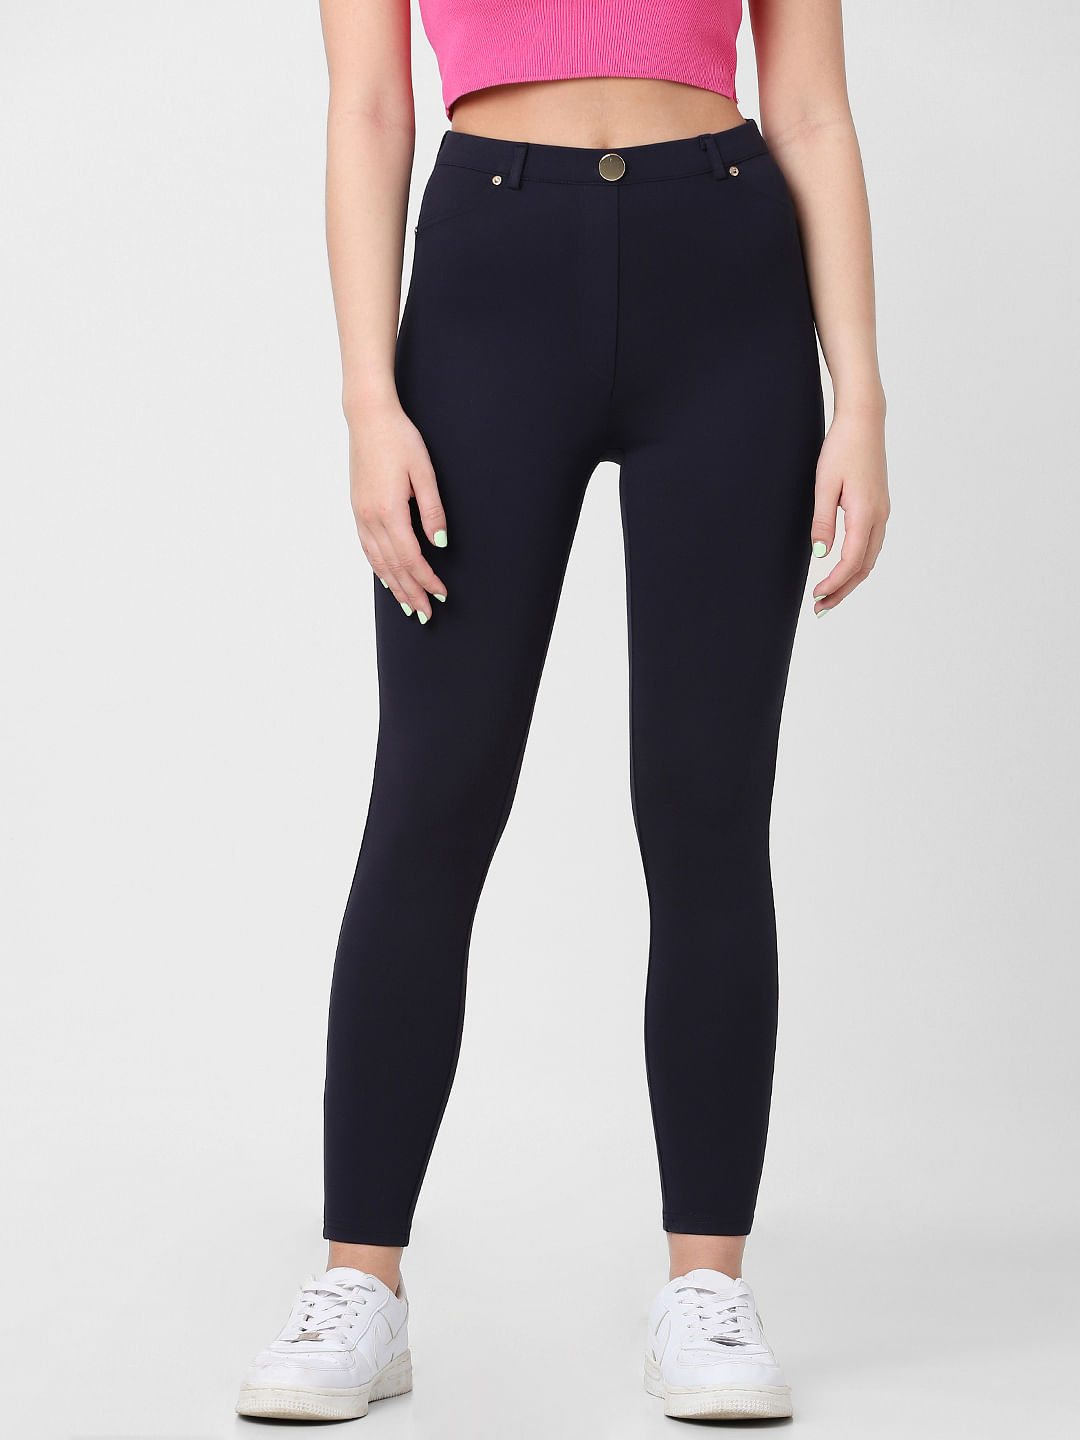 Equilux Ruby navy riding leggings – Equilux Equestrian